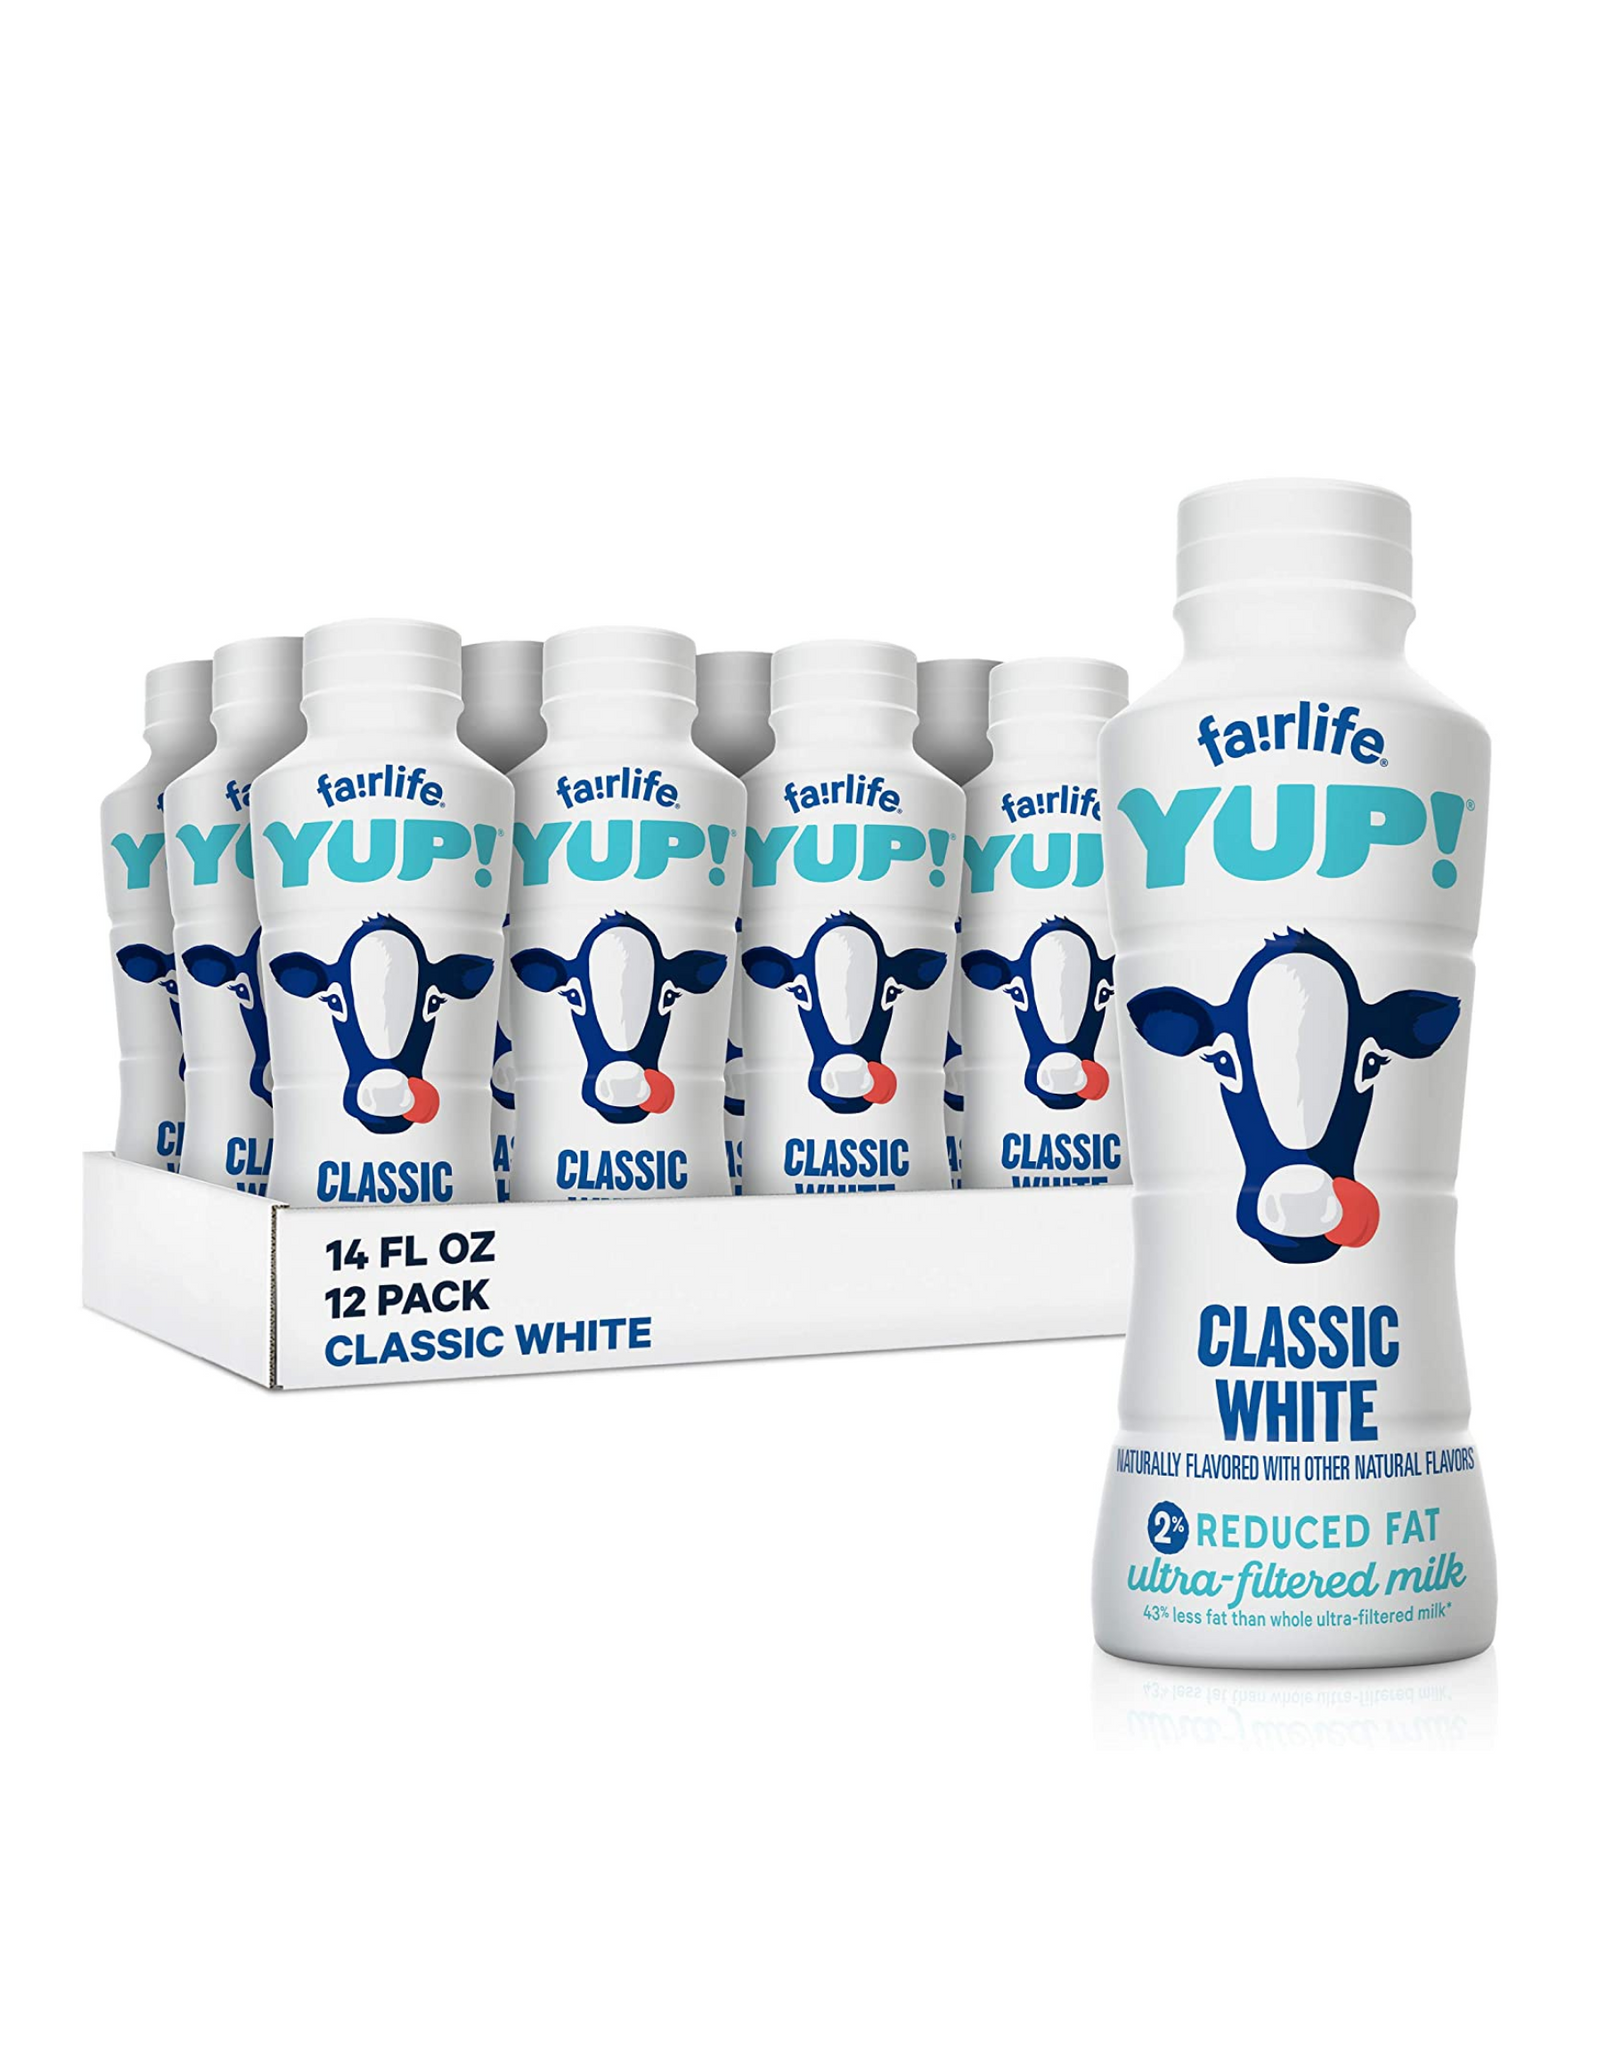 Fairlife YUP! Low Fat Ultra-Filtered Milk, Classic White, 14 fl oz, Pack of 12 (Packaging May Vary)